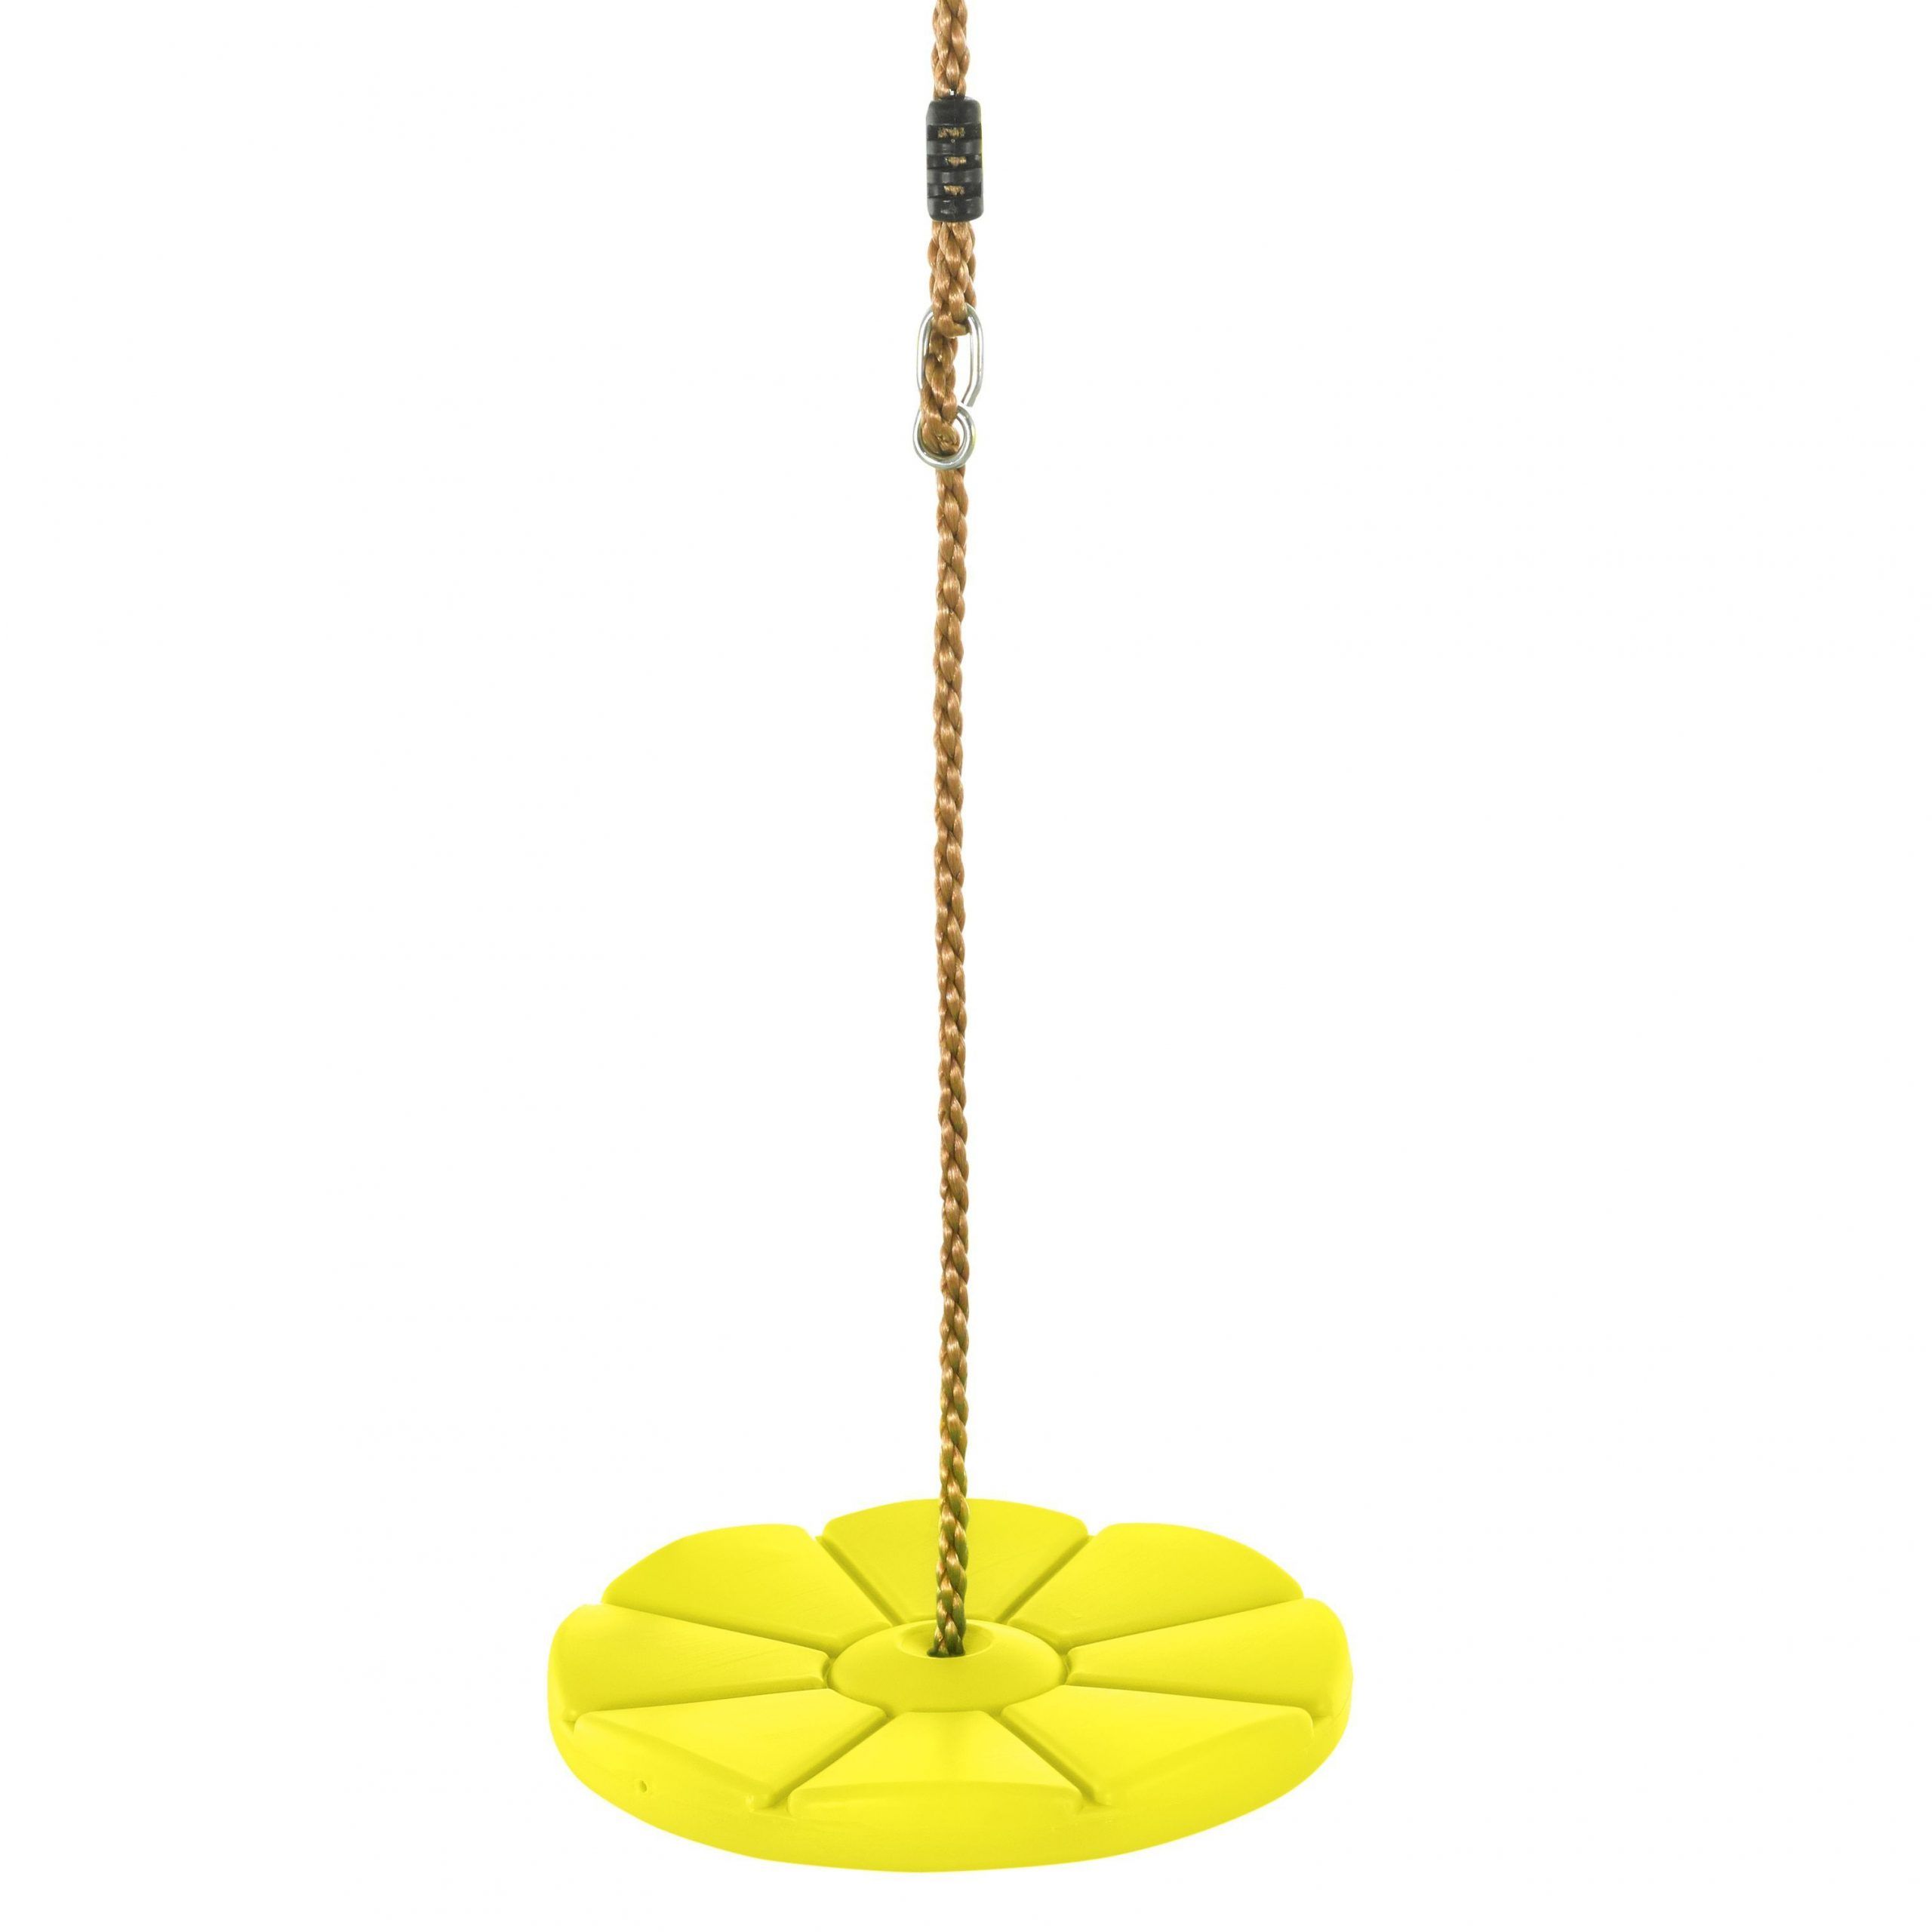 Nest Swings With Adjustable Ropes Regarding Best And Newest Swingan Cool Disc Swing With Adjustable Rope Fully Assembled (View 26 of 30)